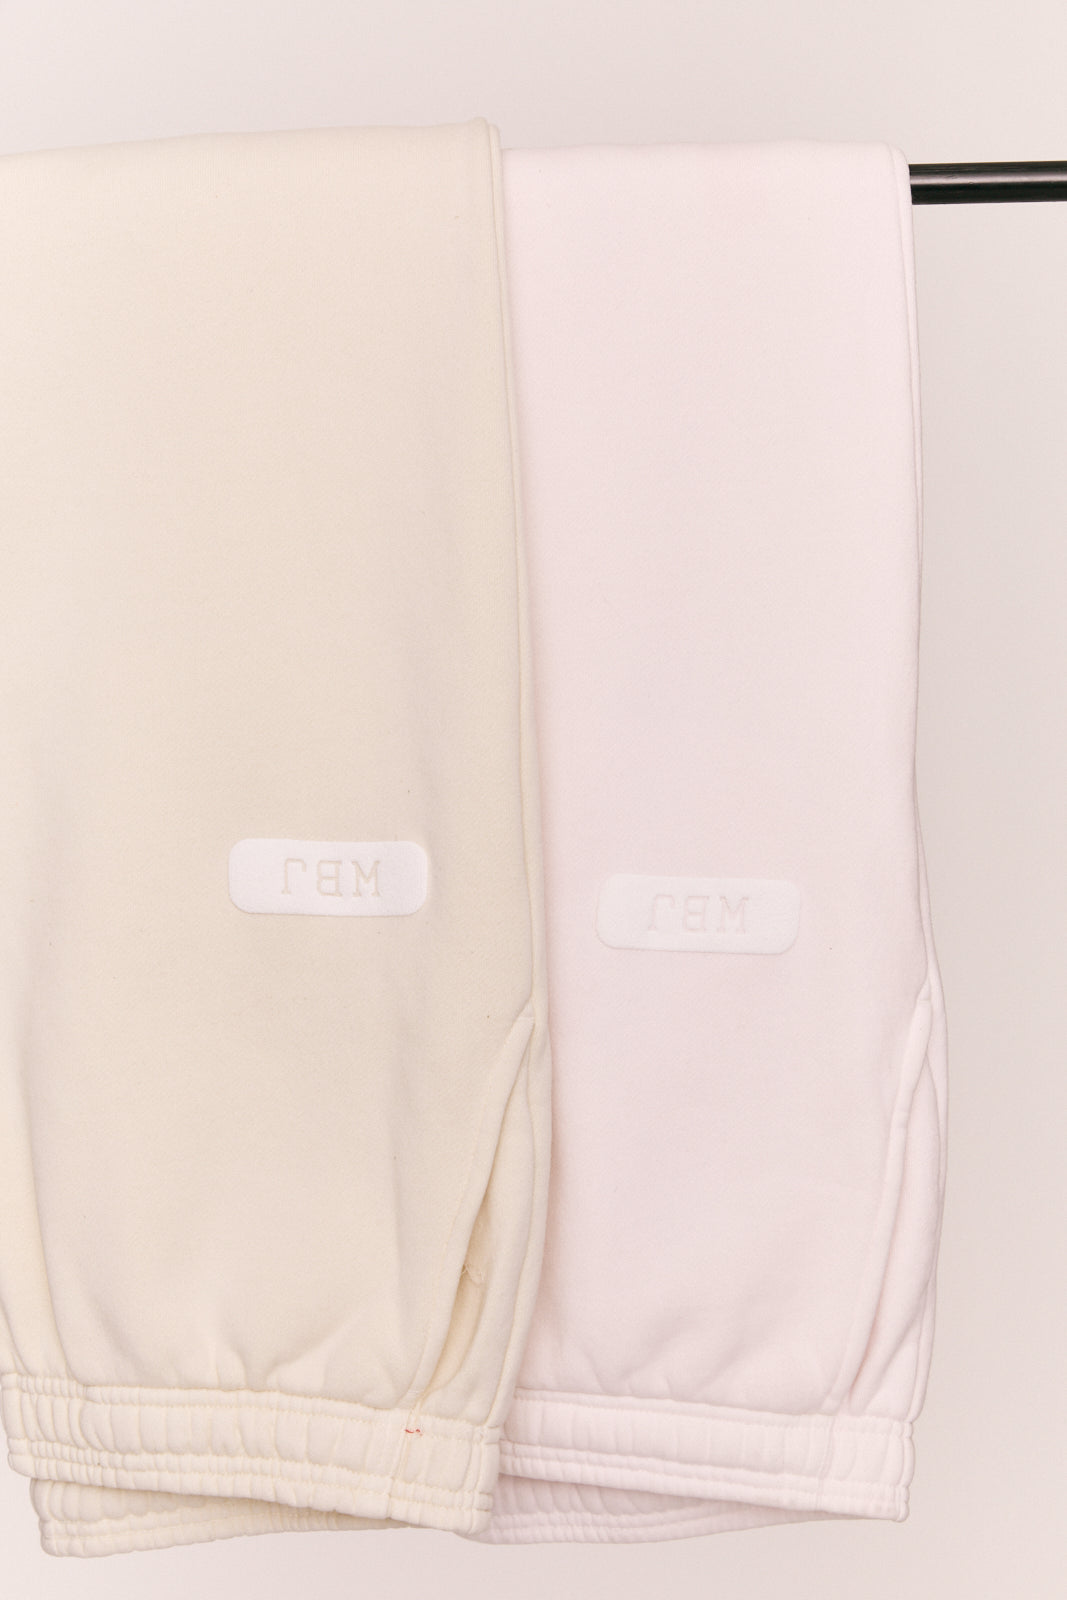 Highly Favored Sweatpants (Cream)